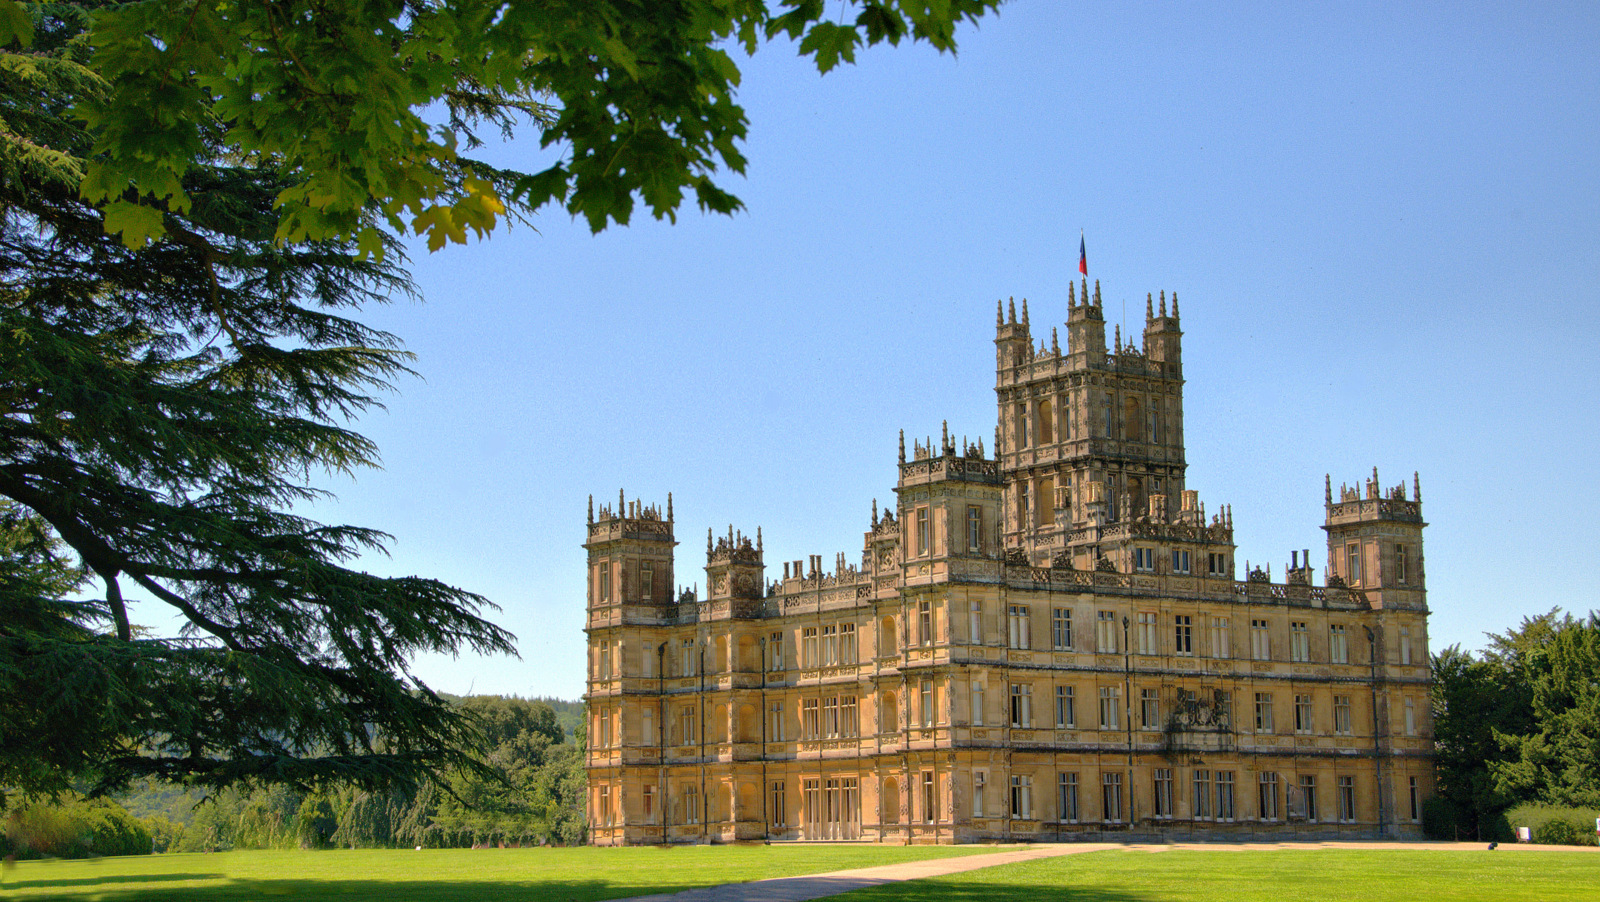 Highclere Castle - Downton Abbey - Wed 28th July 2021